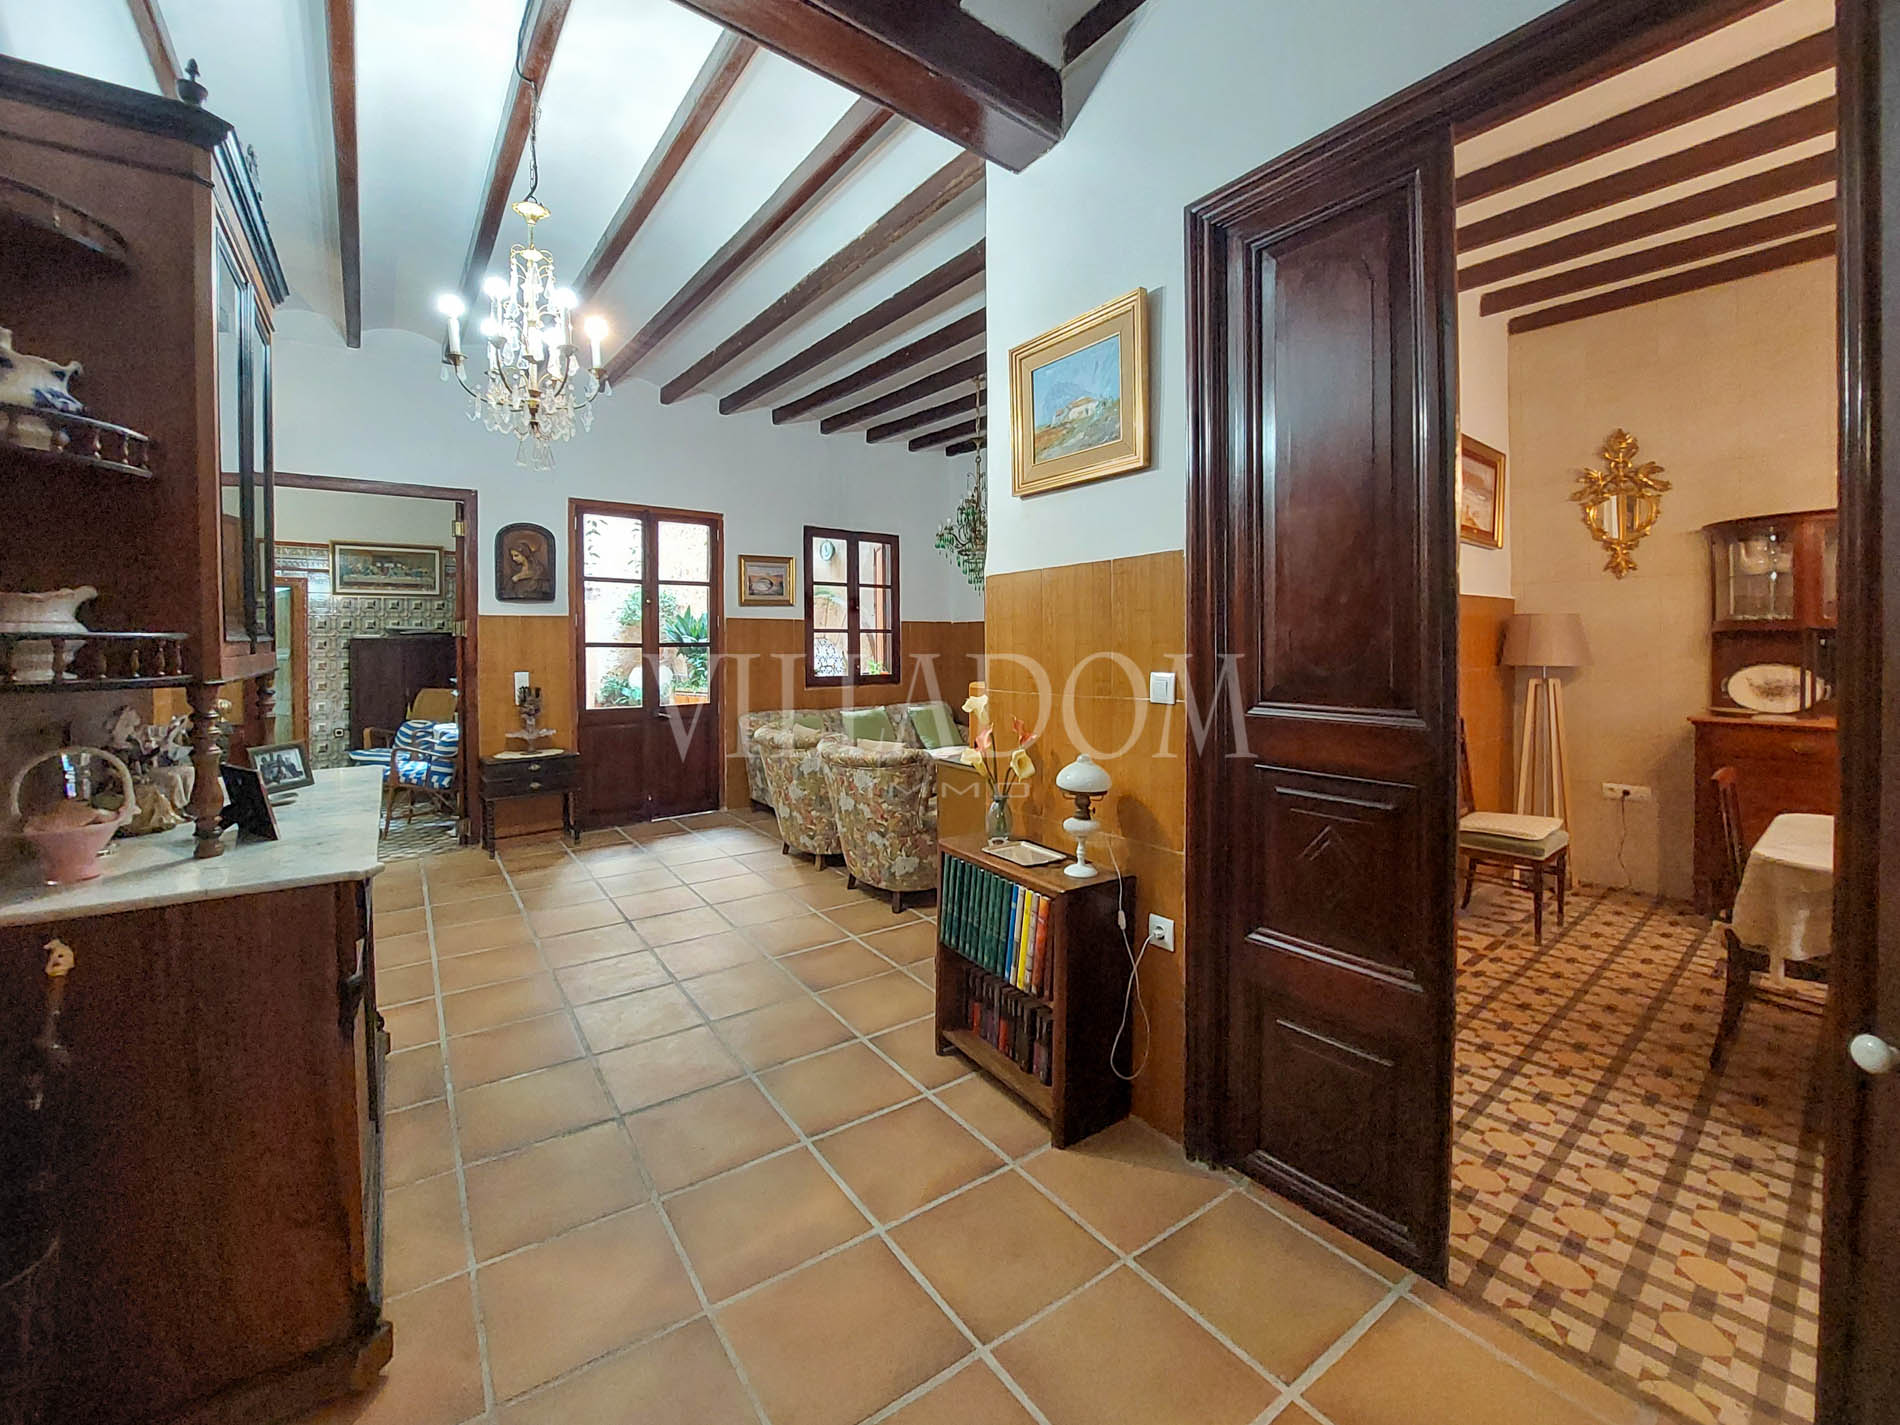 XIX century house for sale in the historic center of Jávea